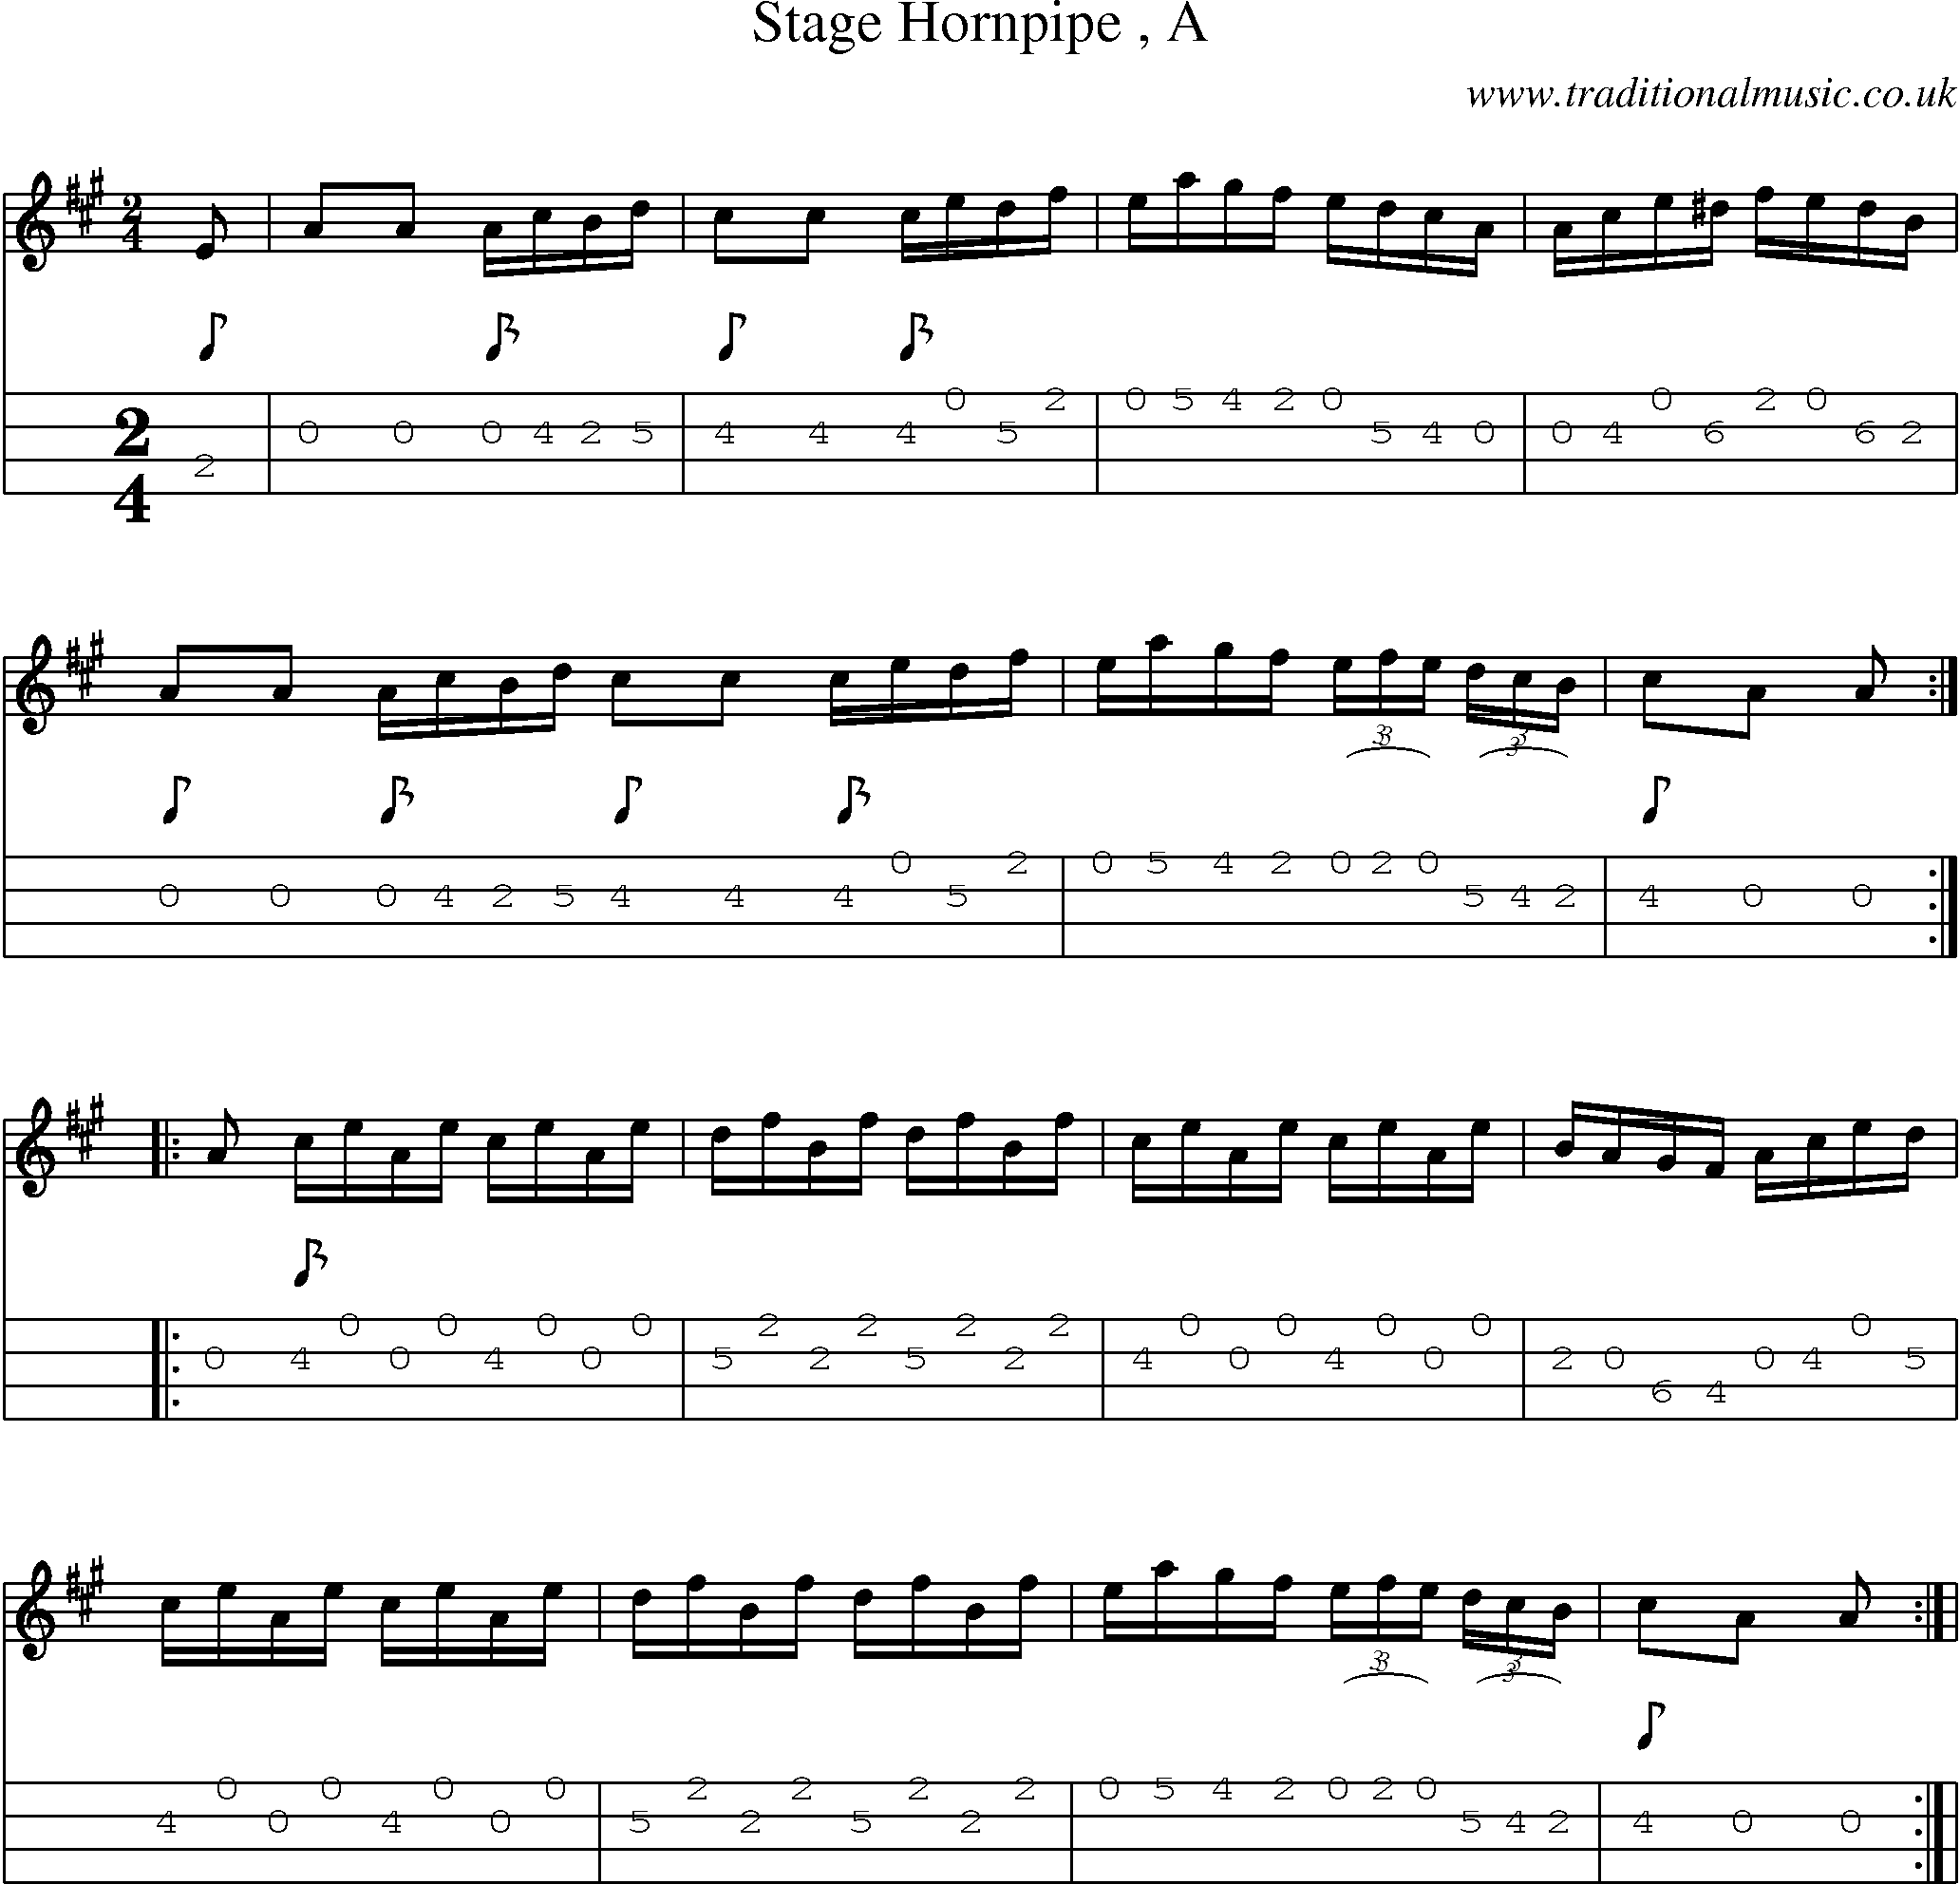 Music Score and Mandolin Tabs for Stage Hornpipe A